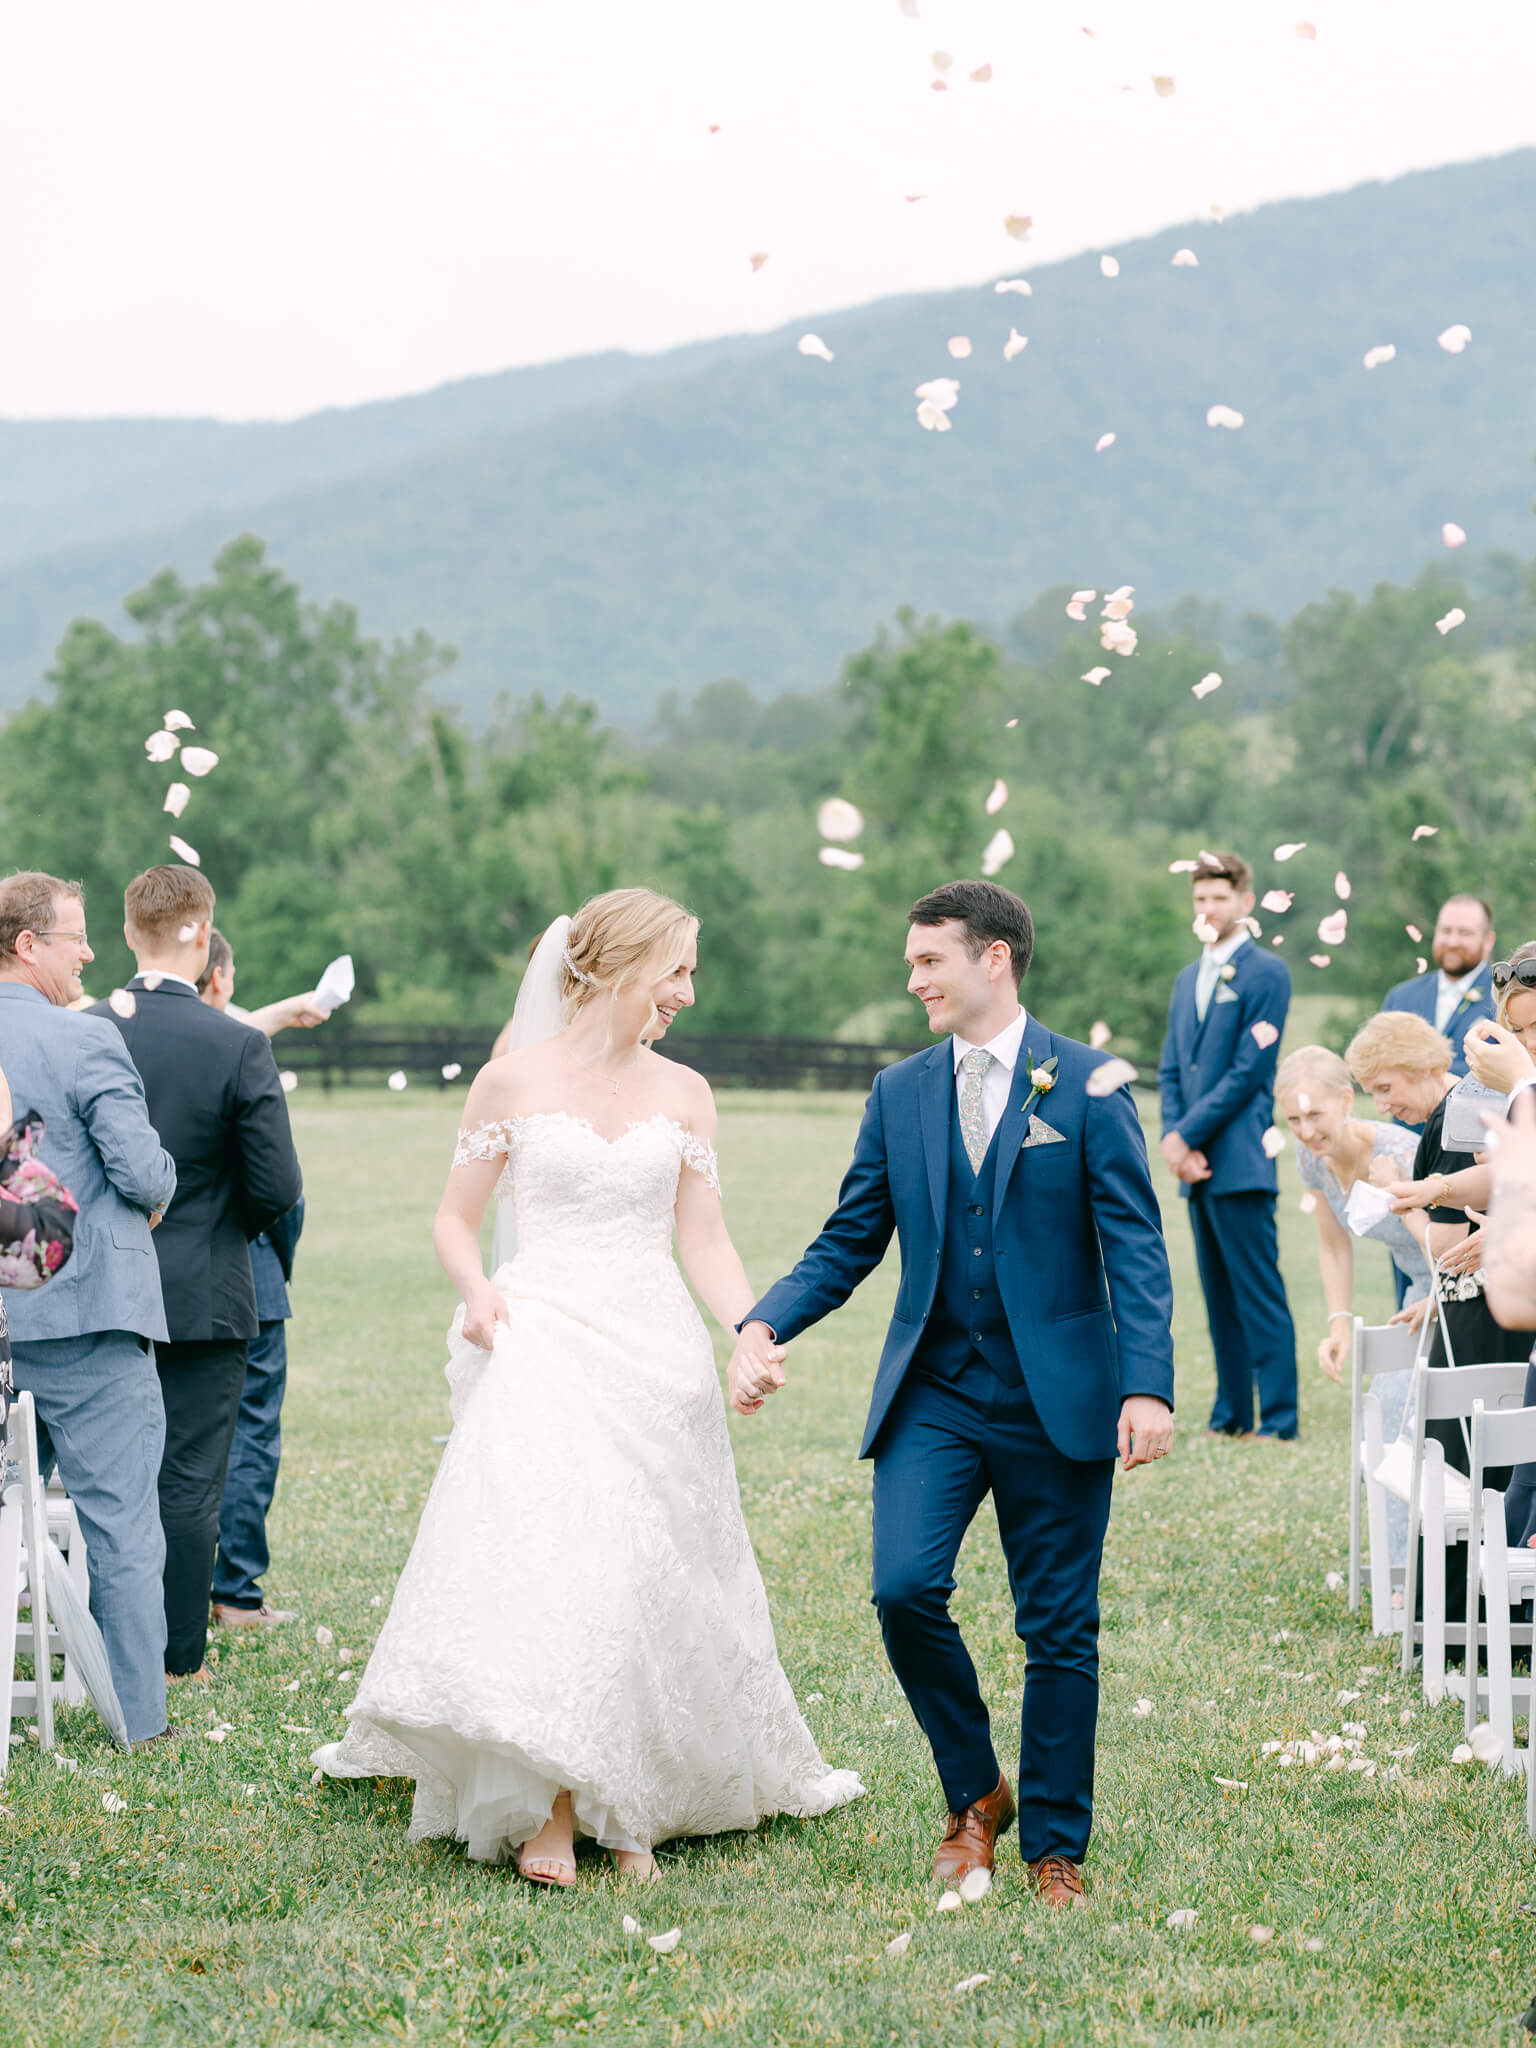 The bride and groom walking down the aisle in front of Virginia's hills after being married while white petals are thrown.